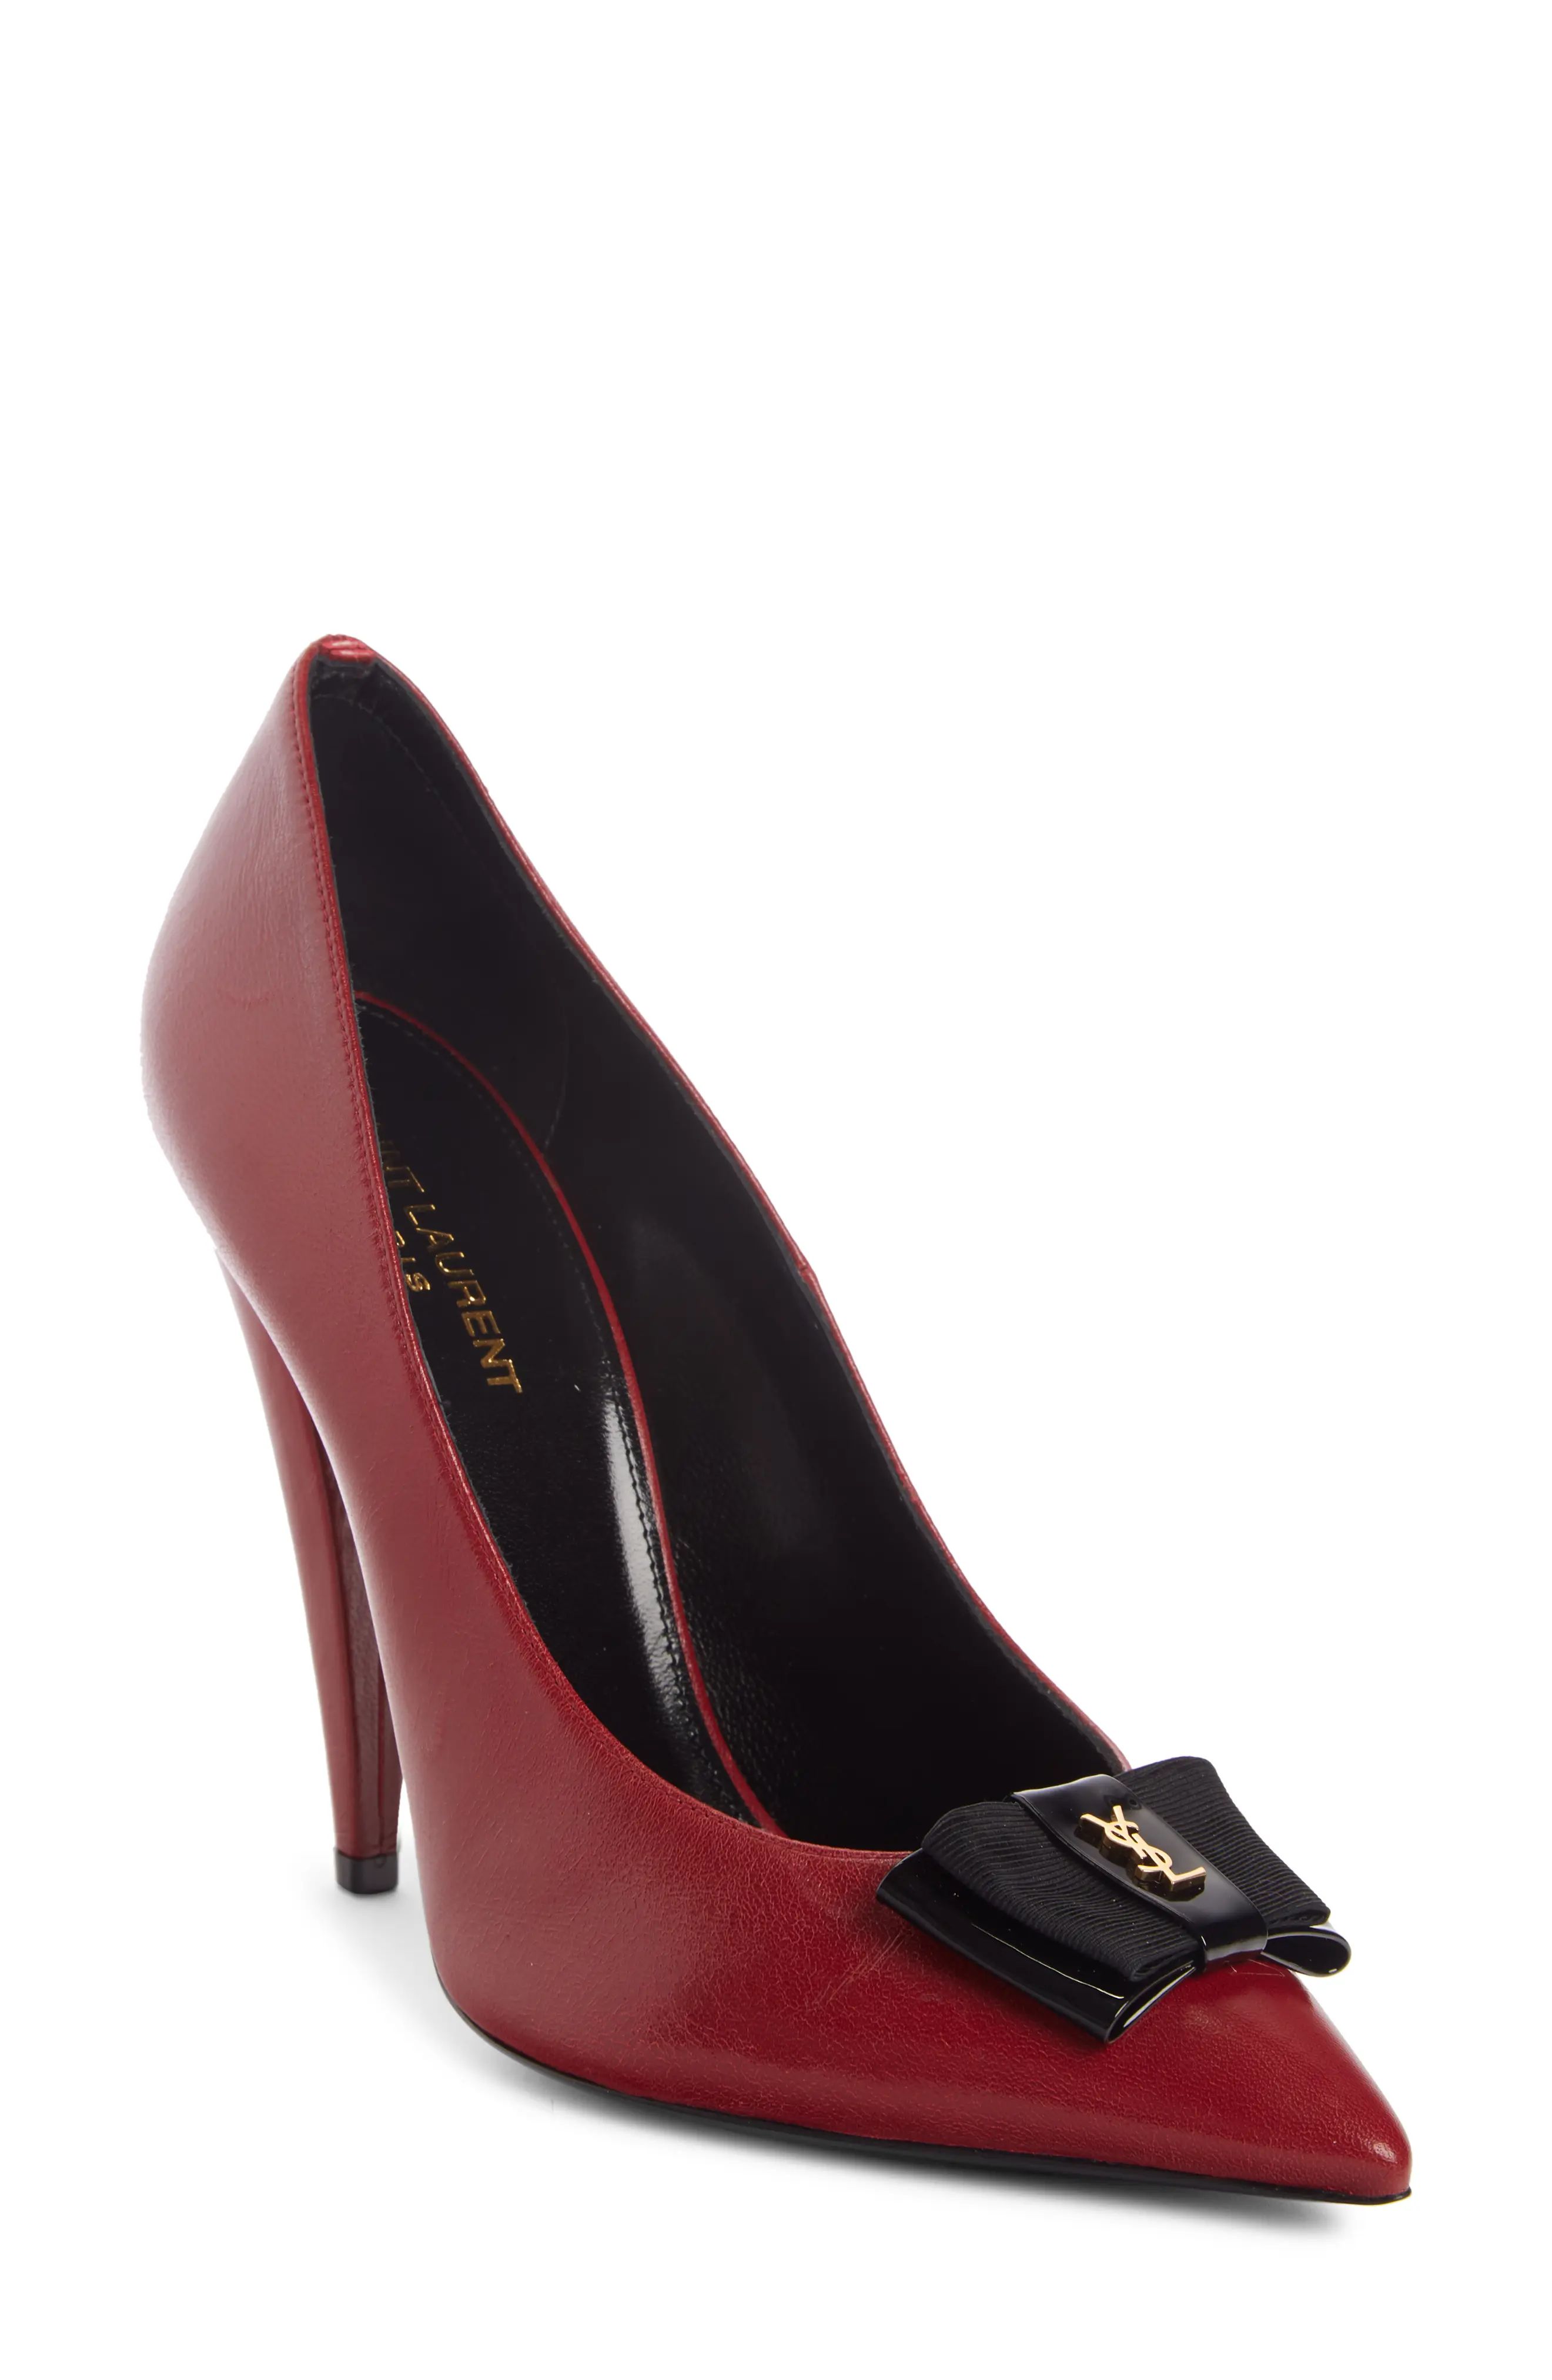 Women's Saint Laurent Anais Ysl Bow Pointed Toe Pump, Size 8US - Red | Nordstrom